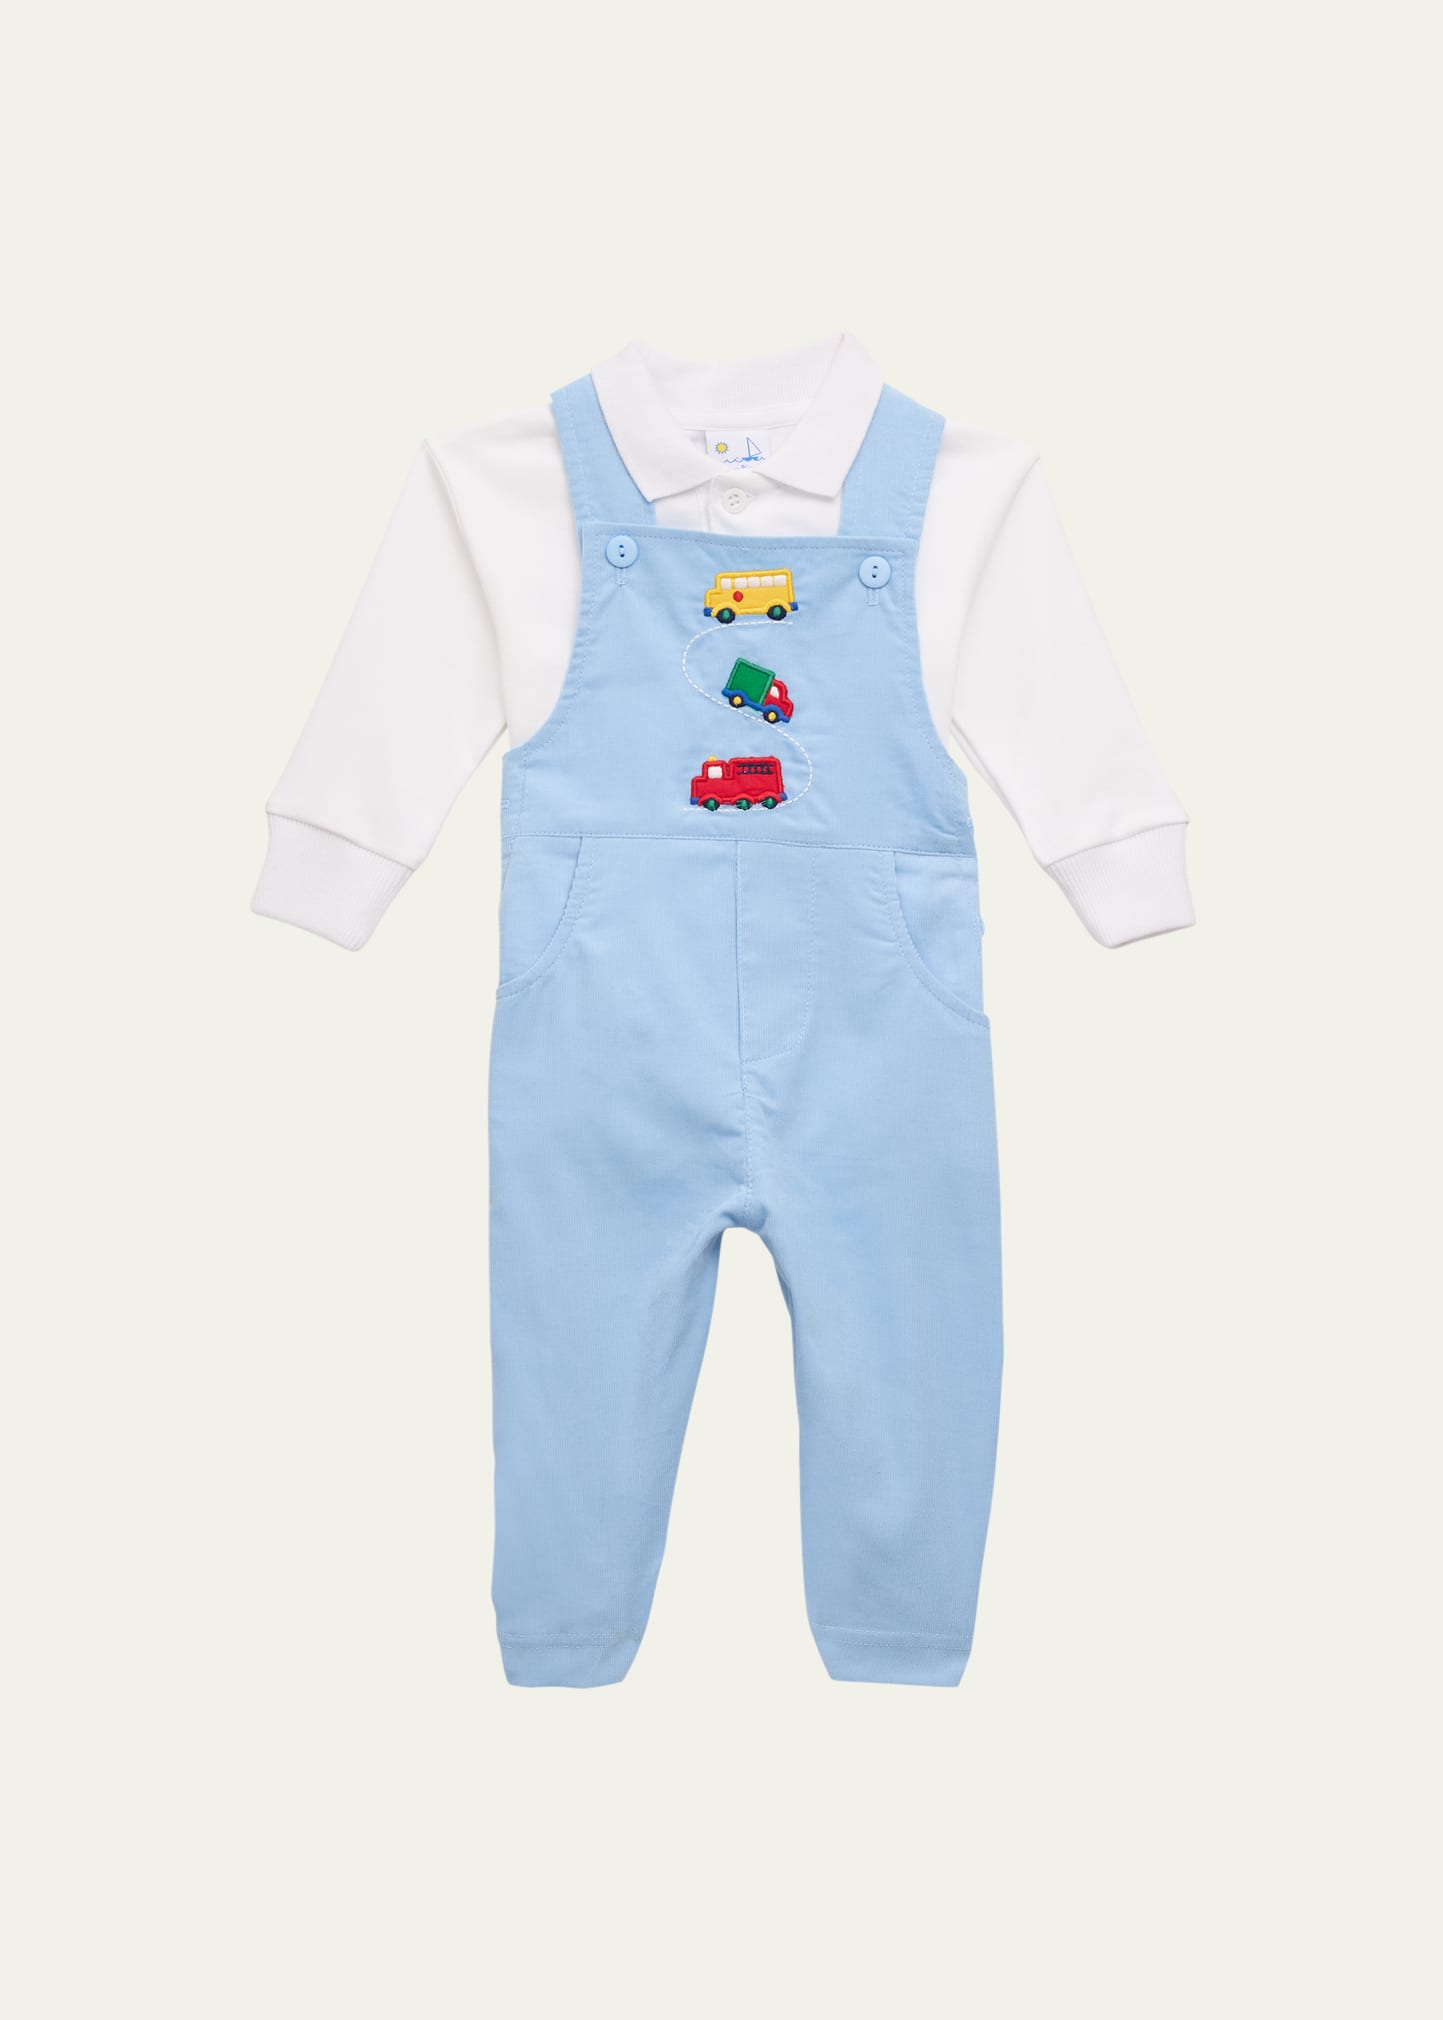 Boy's Embroidered Overalls W/ Polo Shirt, Size 6M-24M